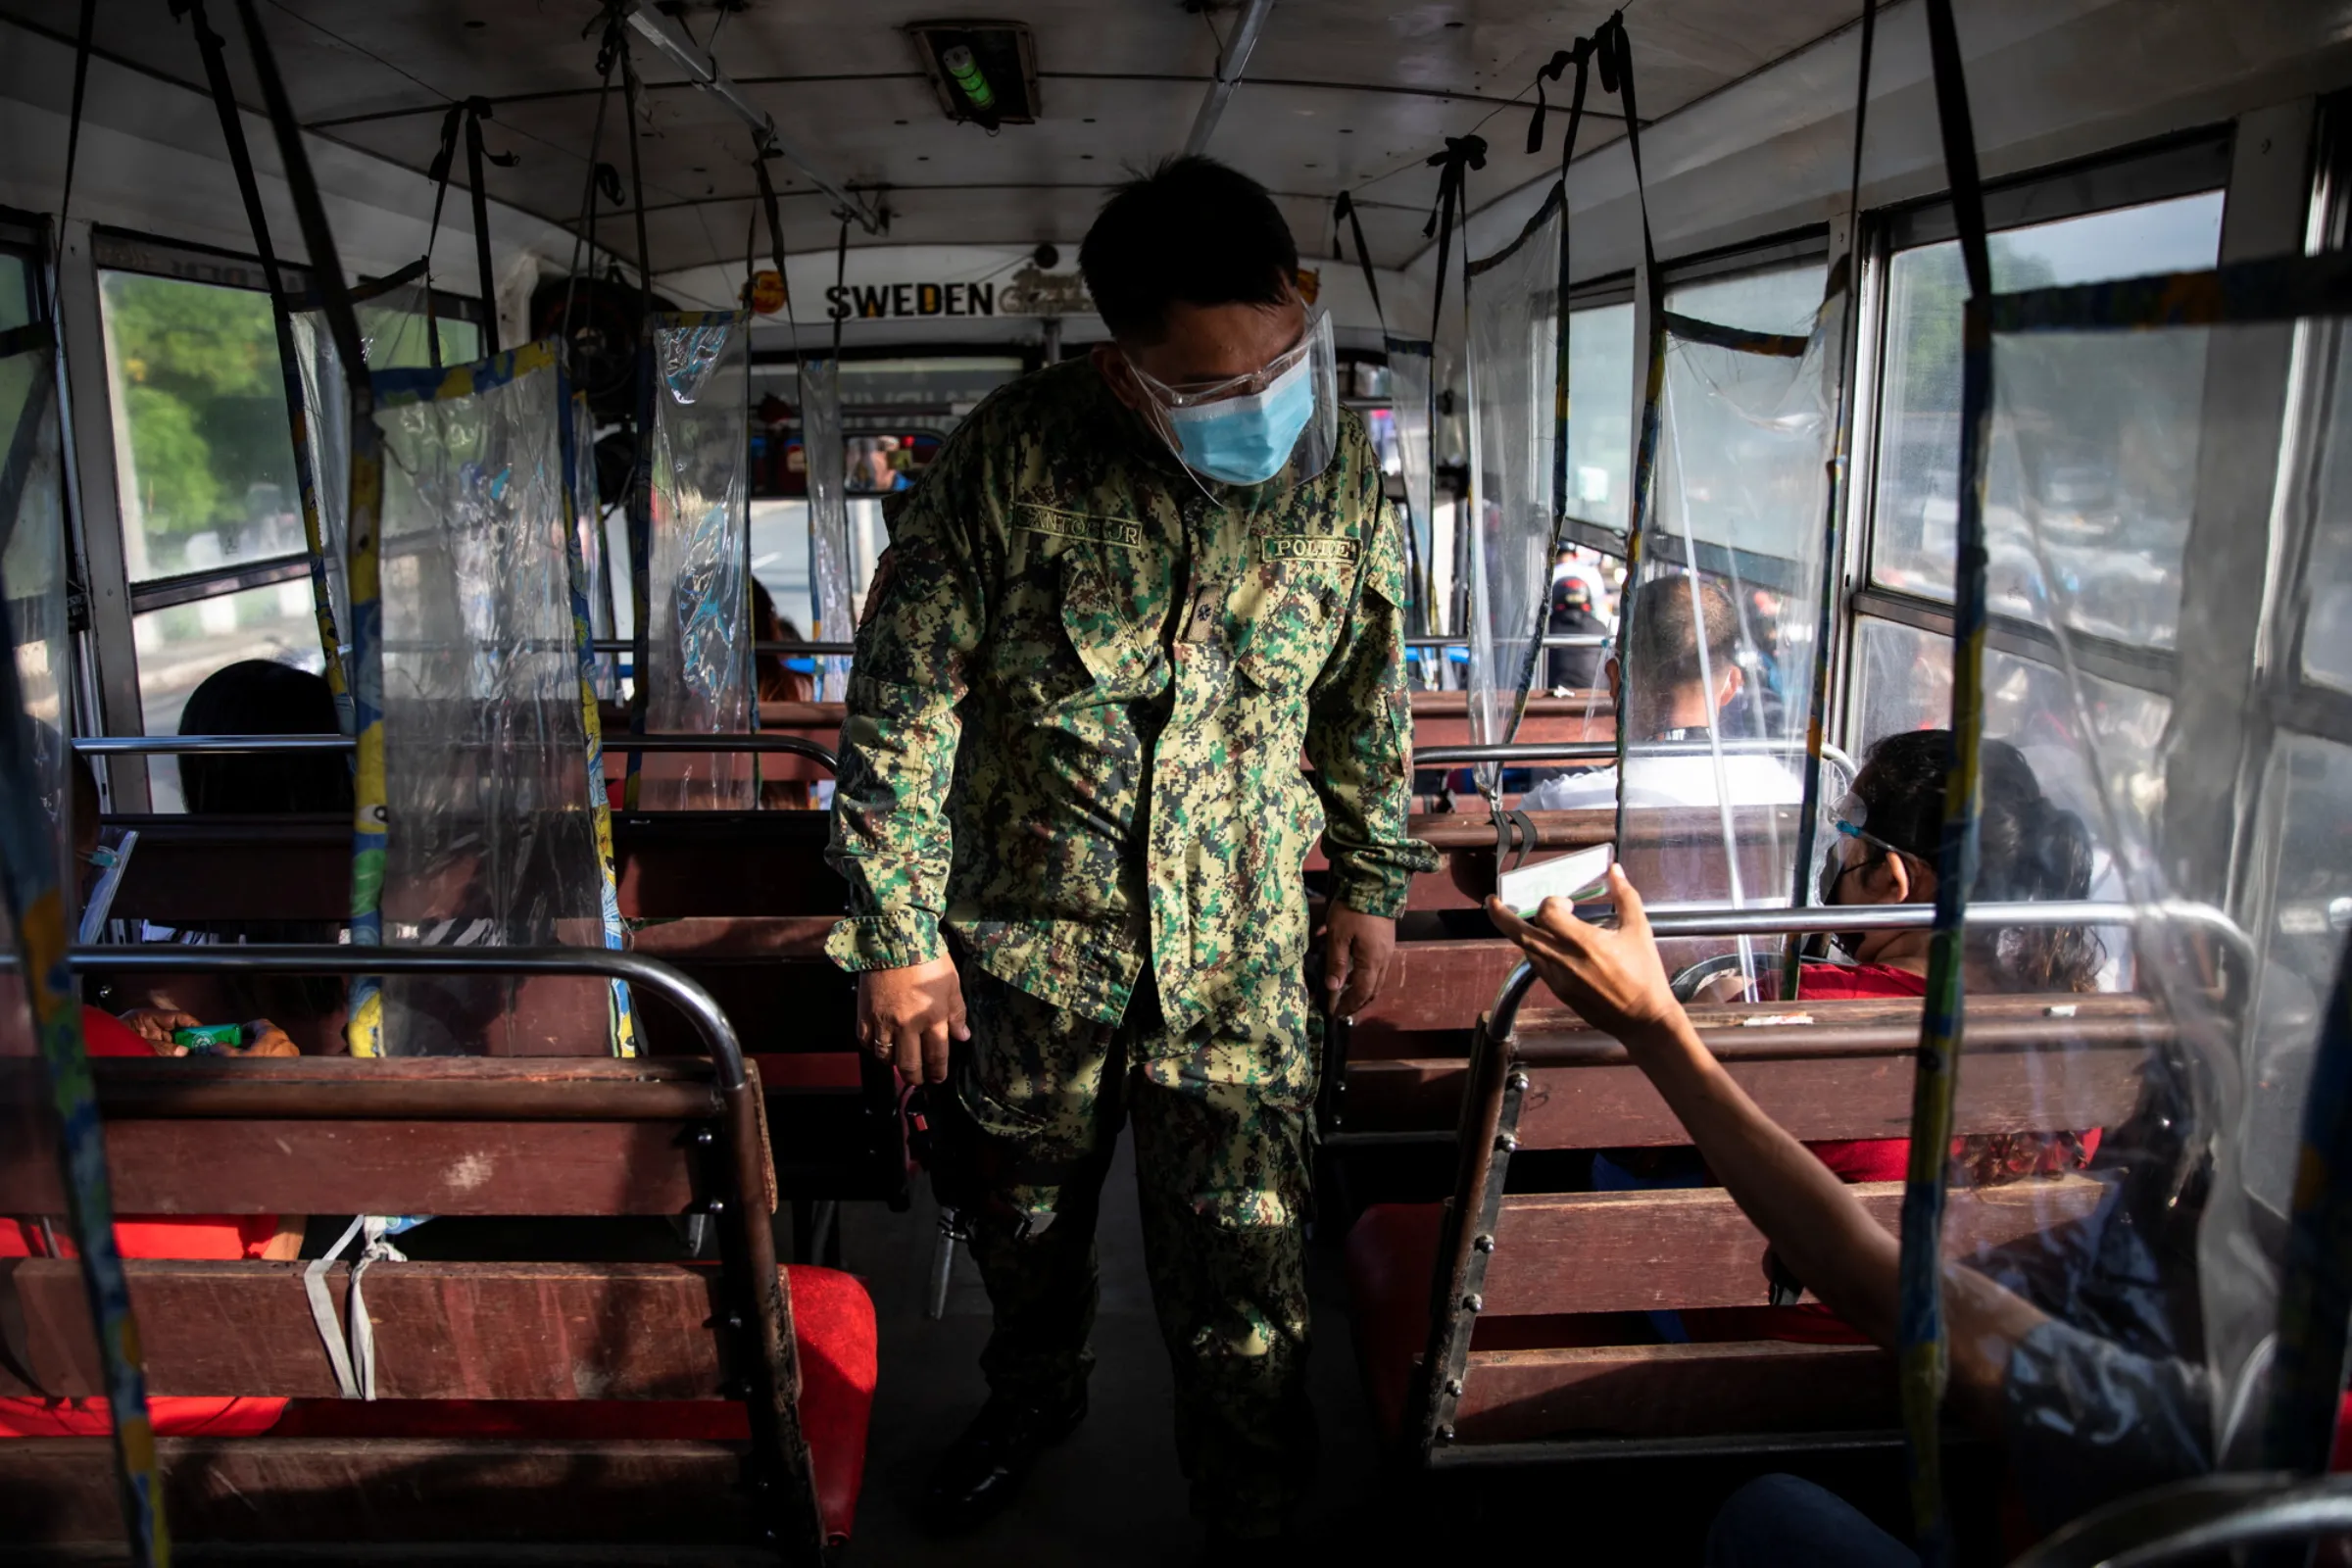 A policeman inspects an ID of a bus passenger passing through a checkpoint on the first day of a two-week lockdown to prevent the spread of the highly infectious coronavirus Delta variant, in Quezon City, Metro Manila, Philippines, August 6, 2021